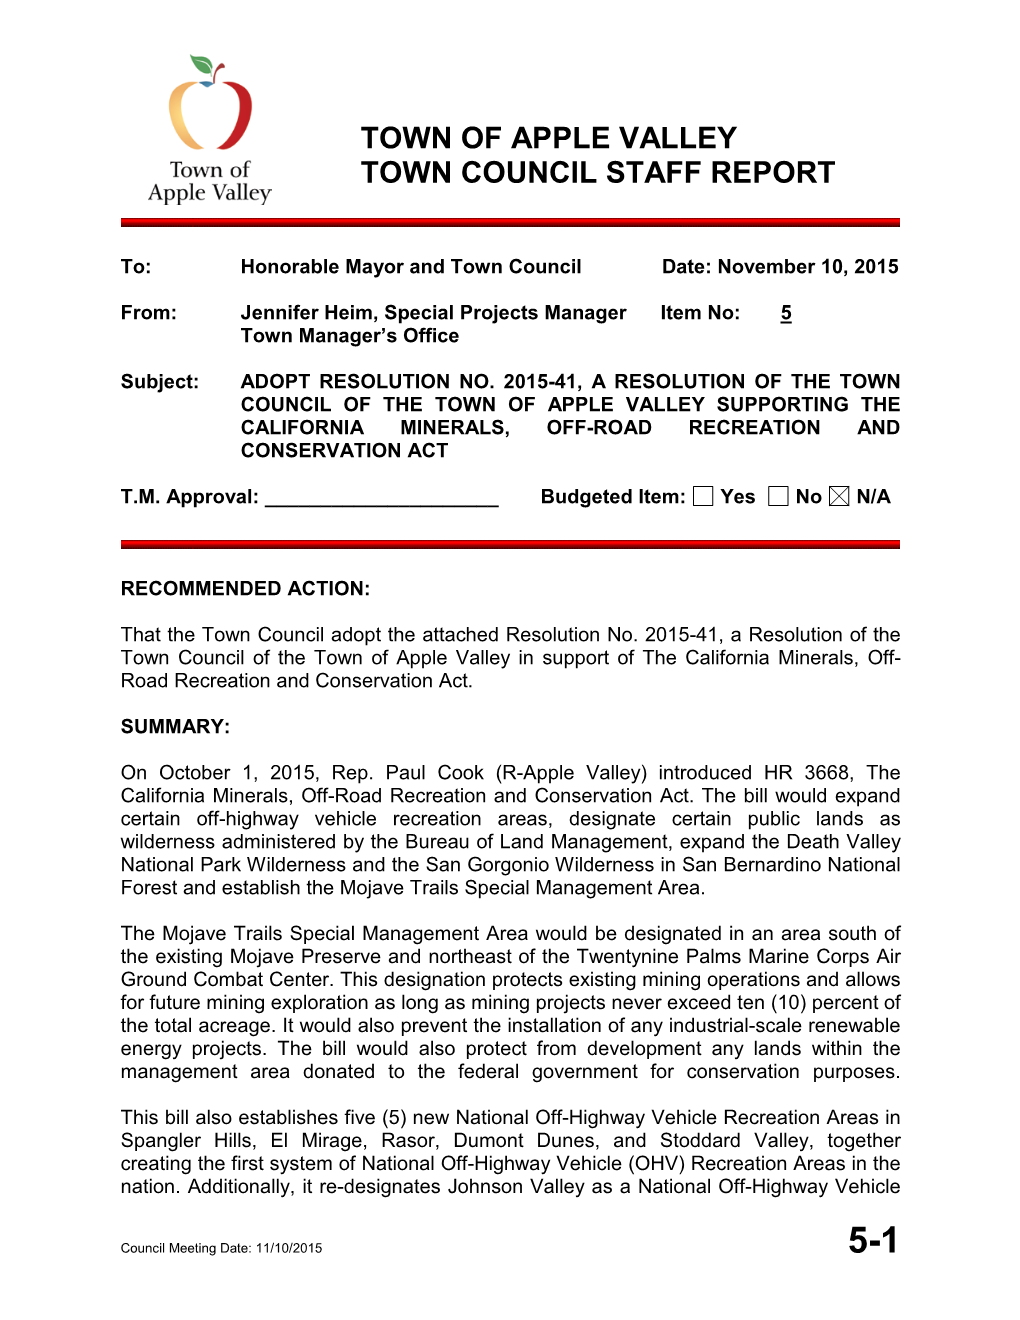 Town of Apple Valley Town Council Staff Report